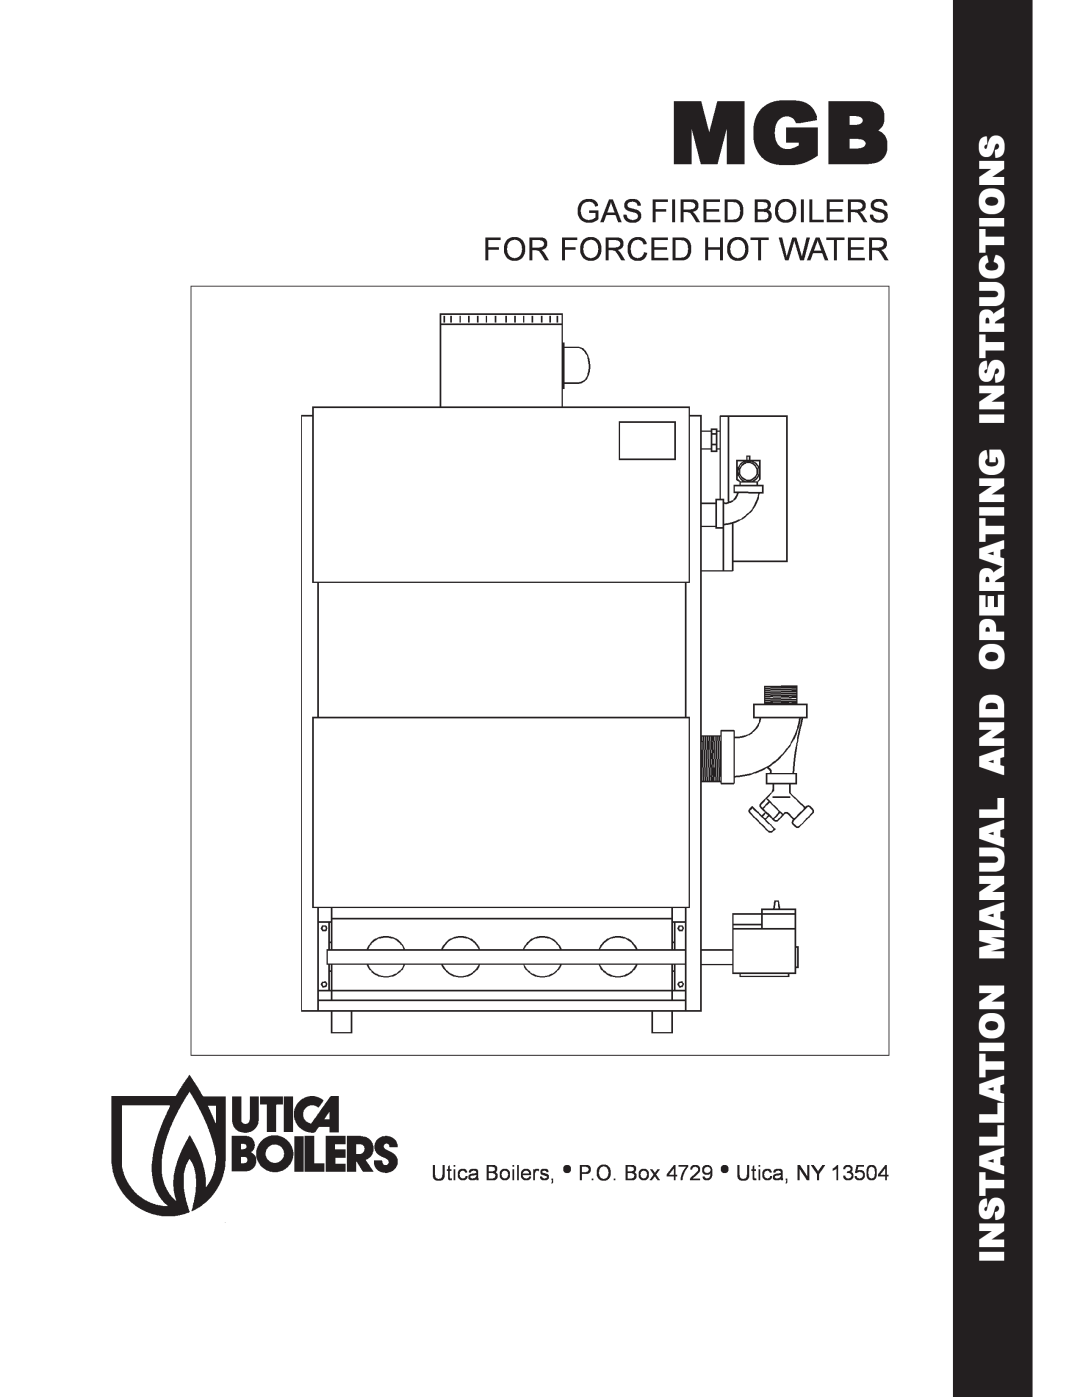 Utica Gas-fired Boiler manual Installation Manual And Operating Instructions, Gas Fired Boilers For Forced Hot Water 